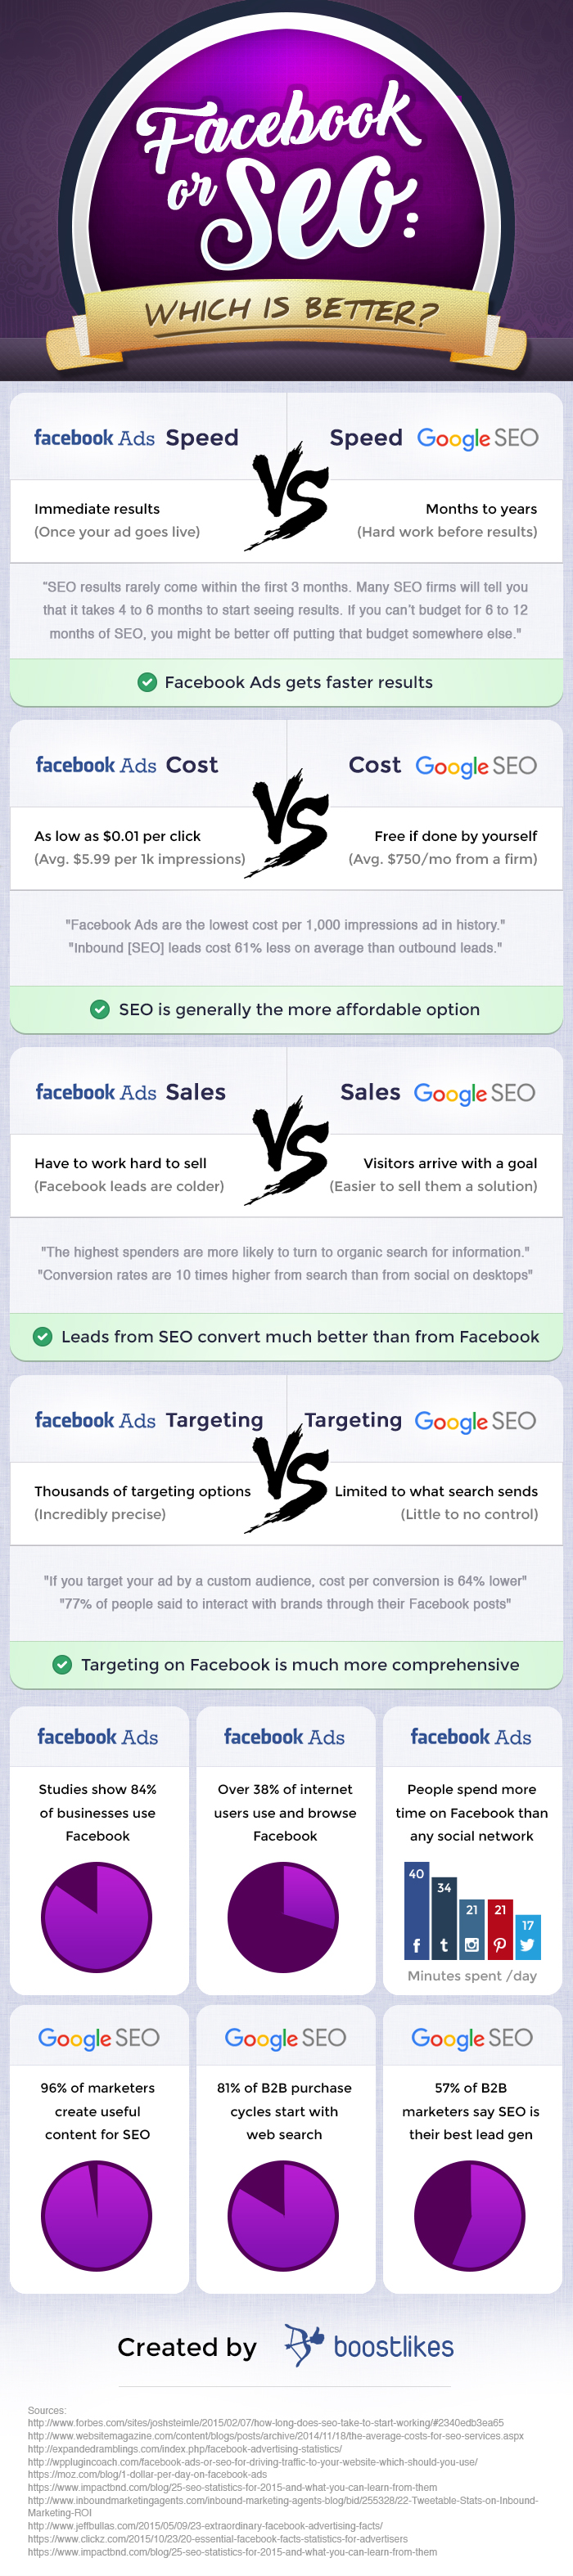 Facebook or SEO: Which is Better? 